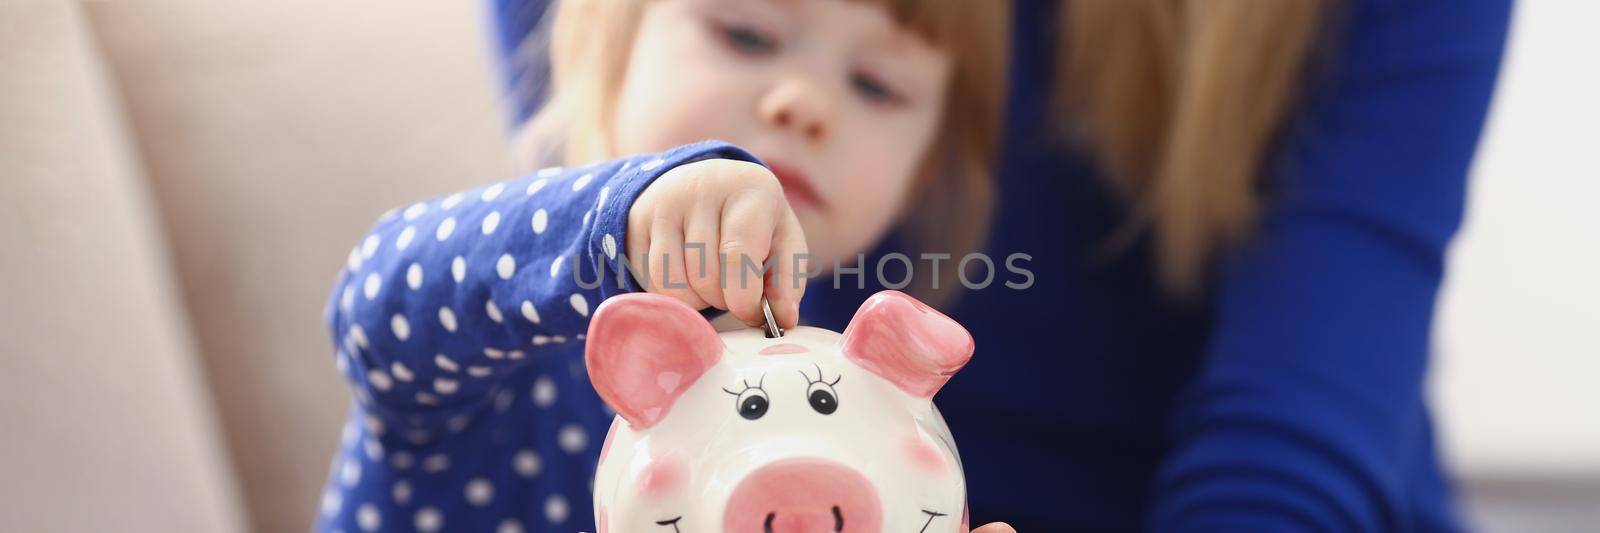 A little girl puts a coin in a pink piggy bank, close-up. Mom teaches the child to save money. The family is saving money for charity